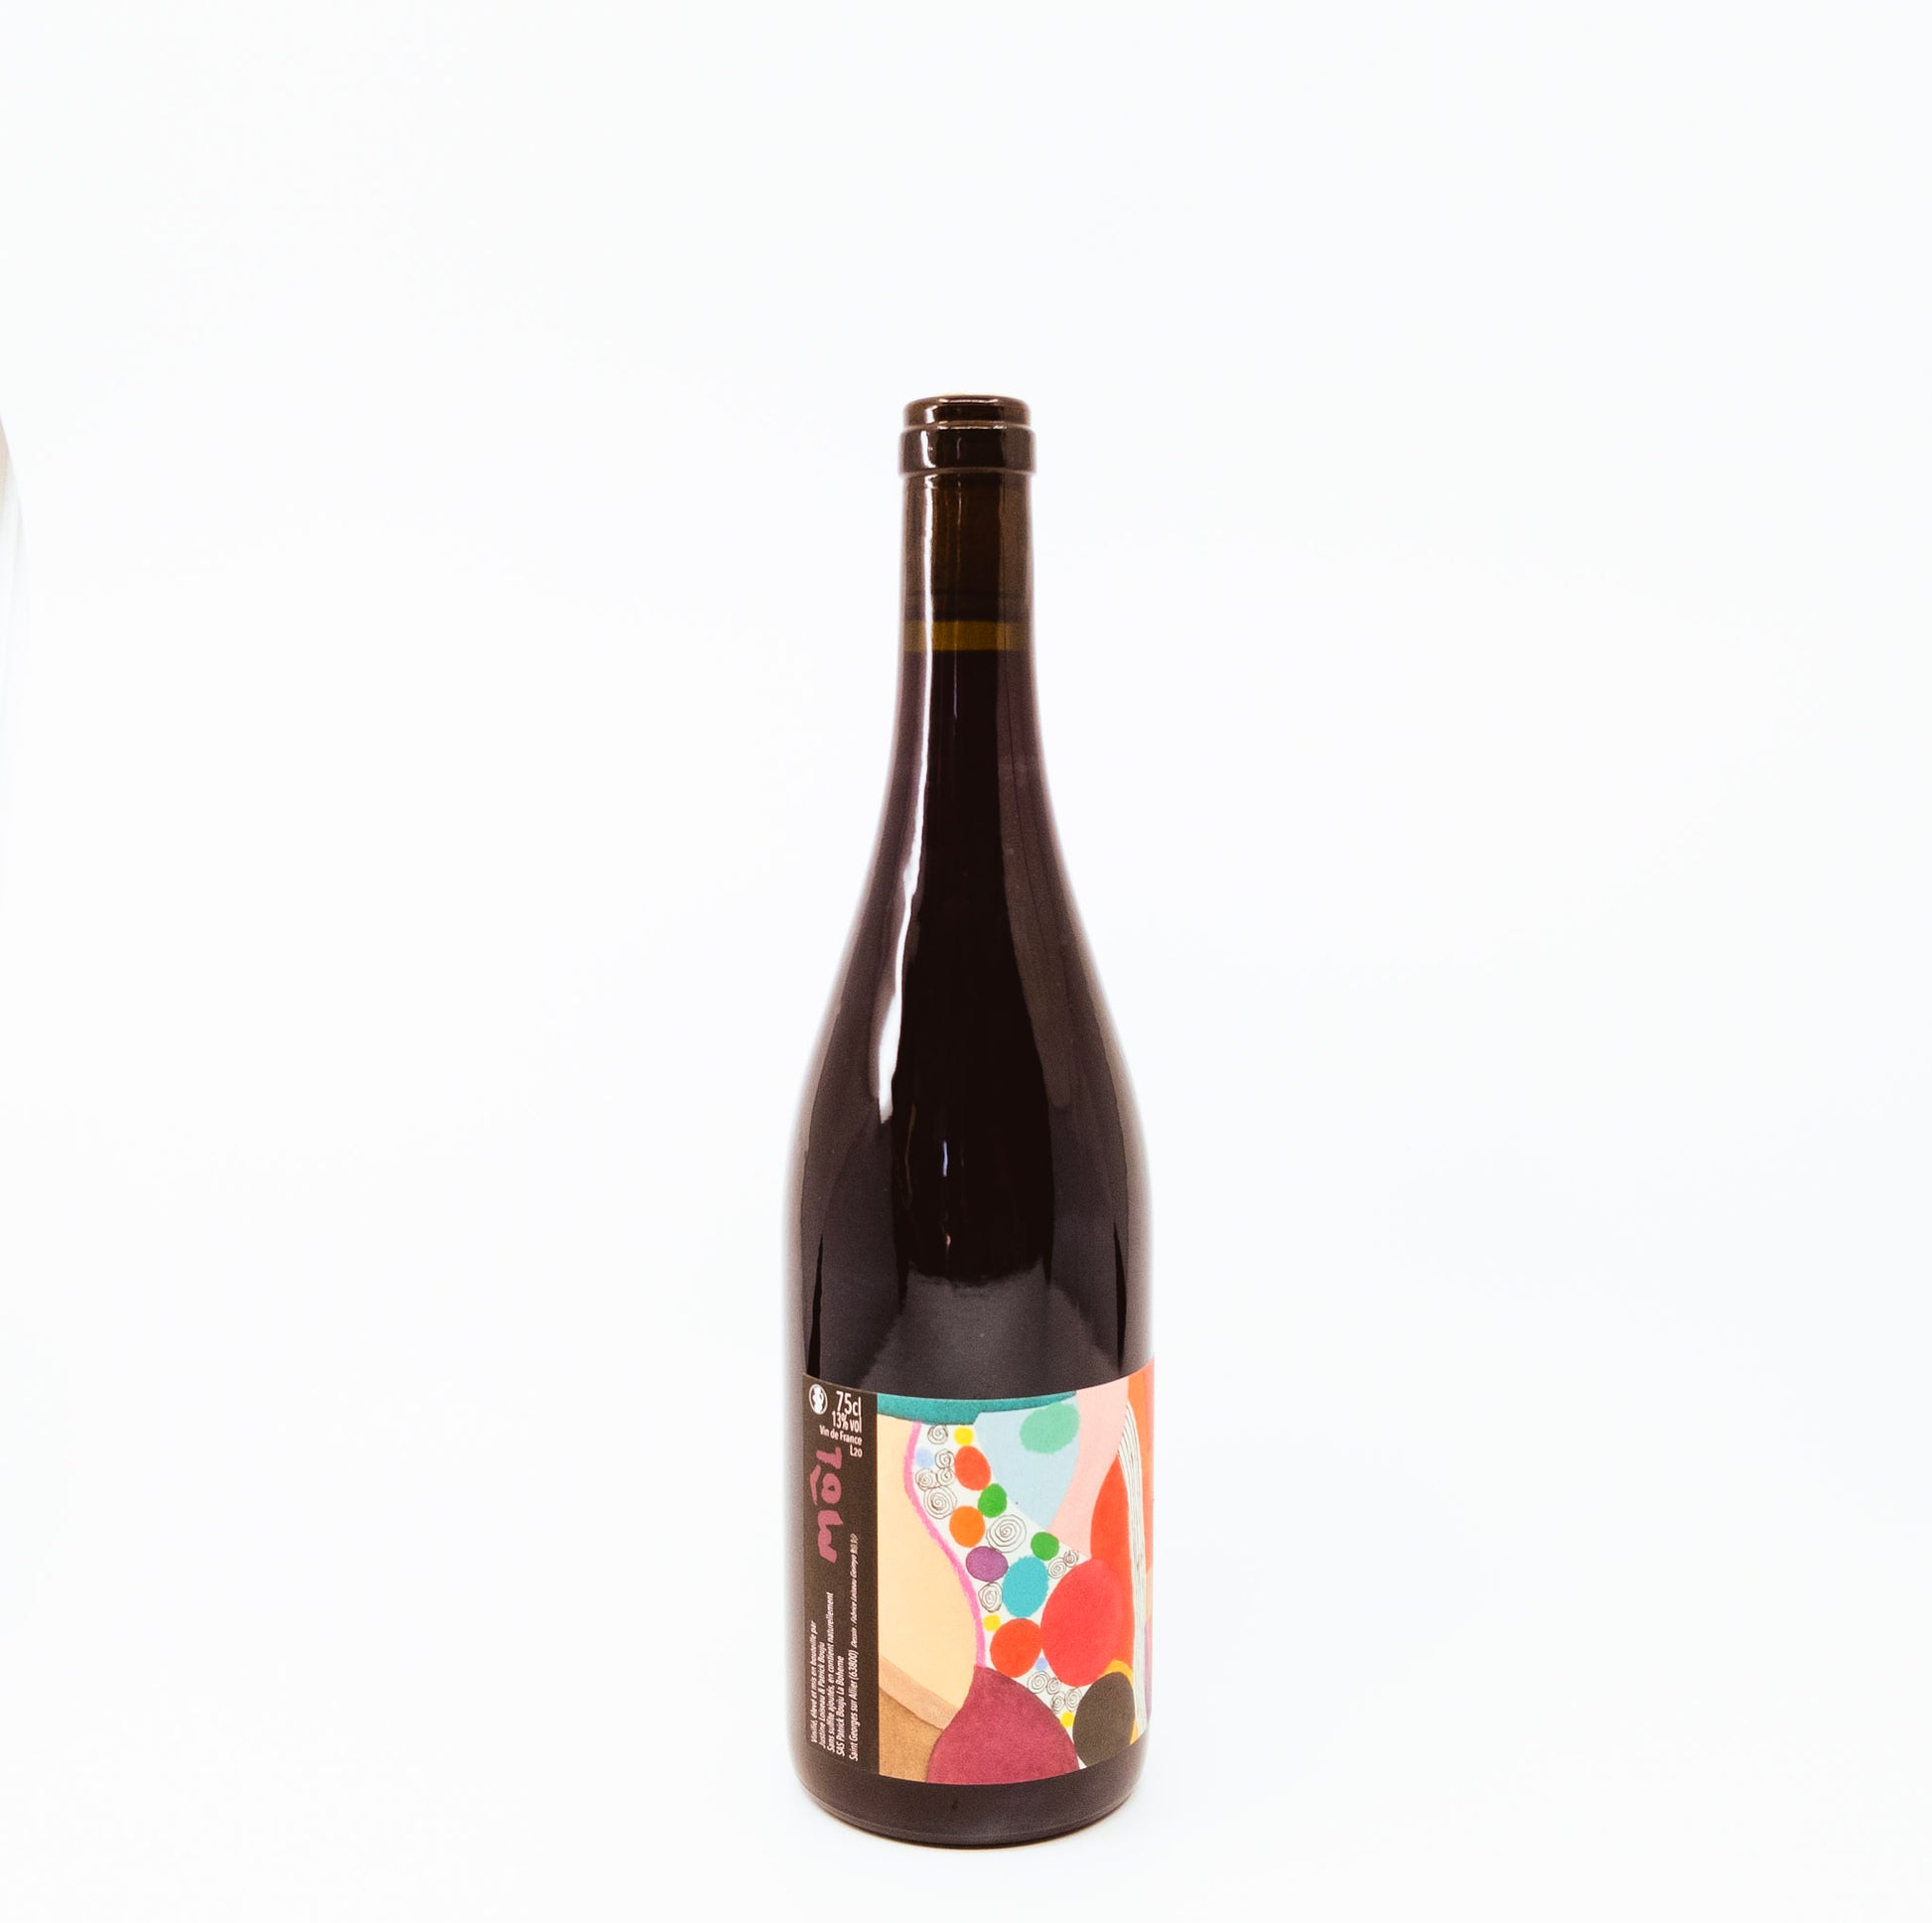 black bottle with colorful label